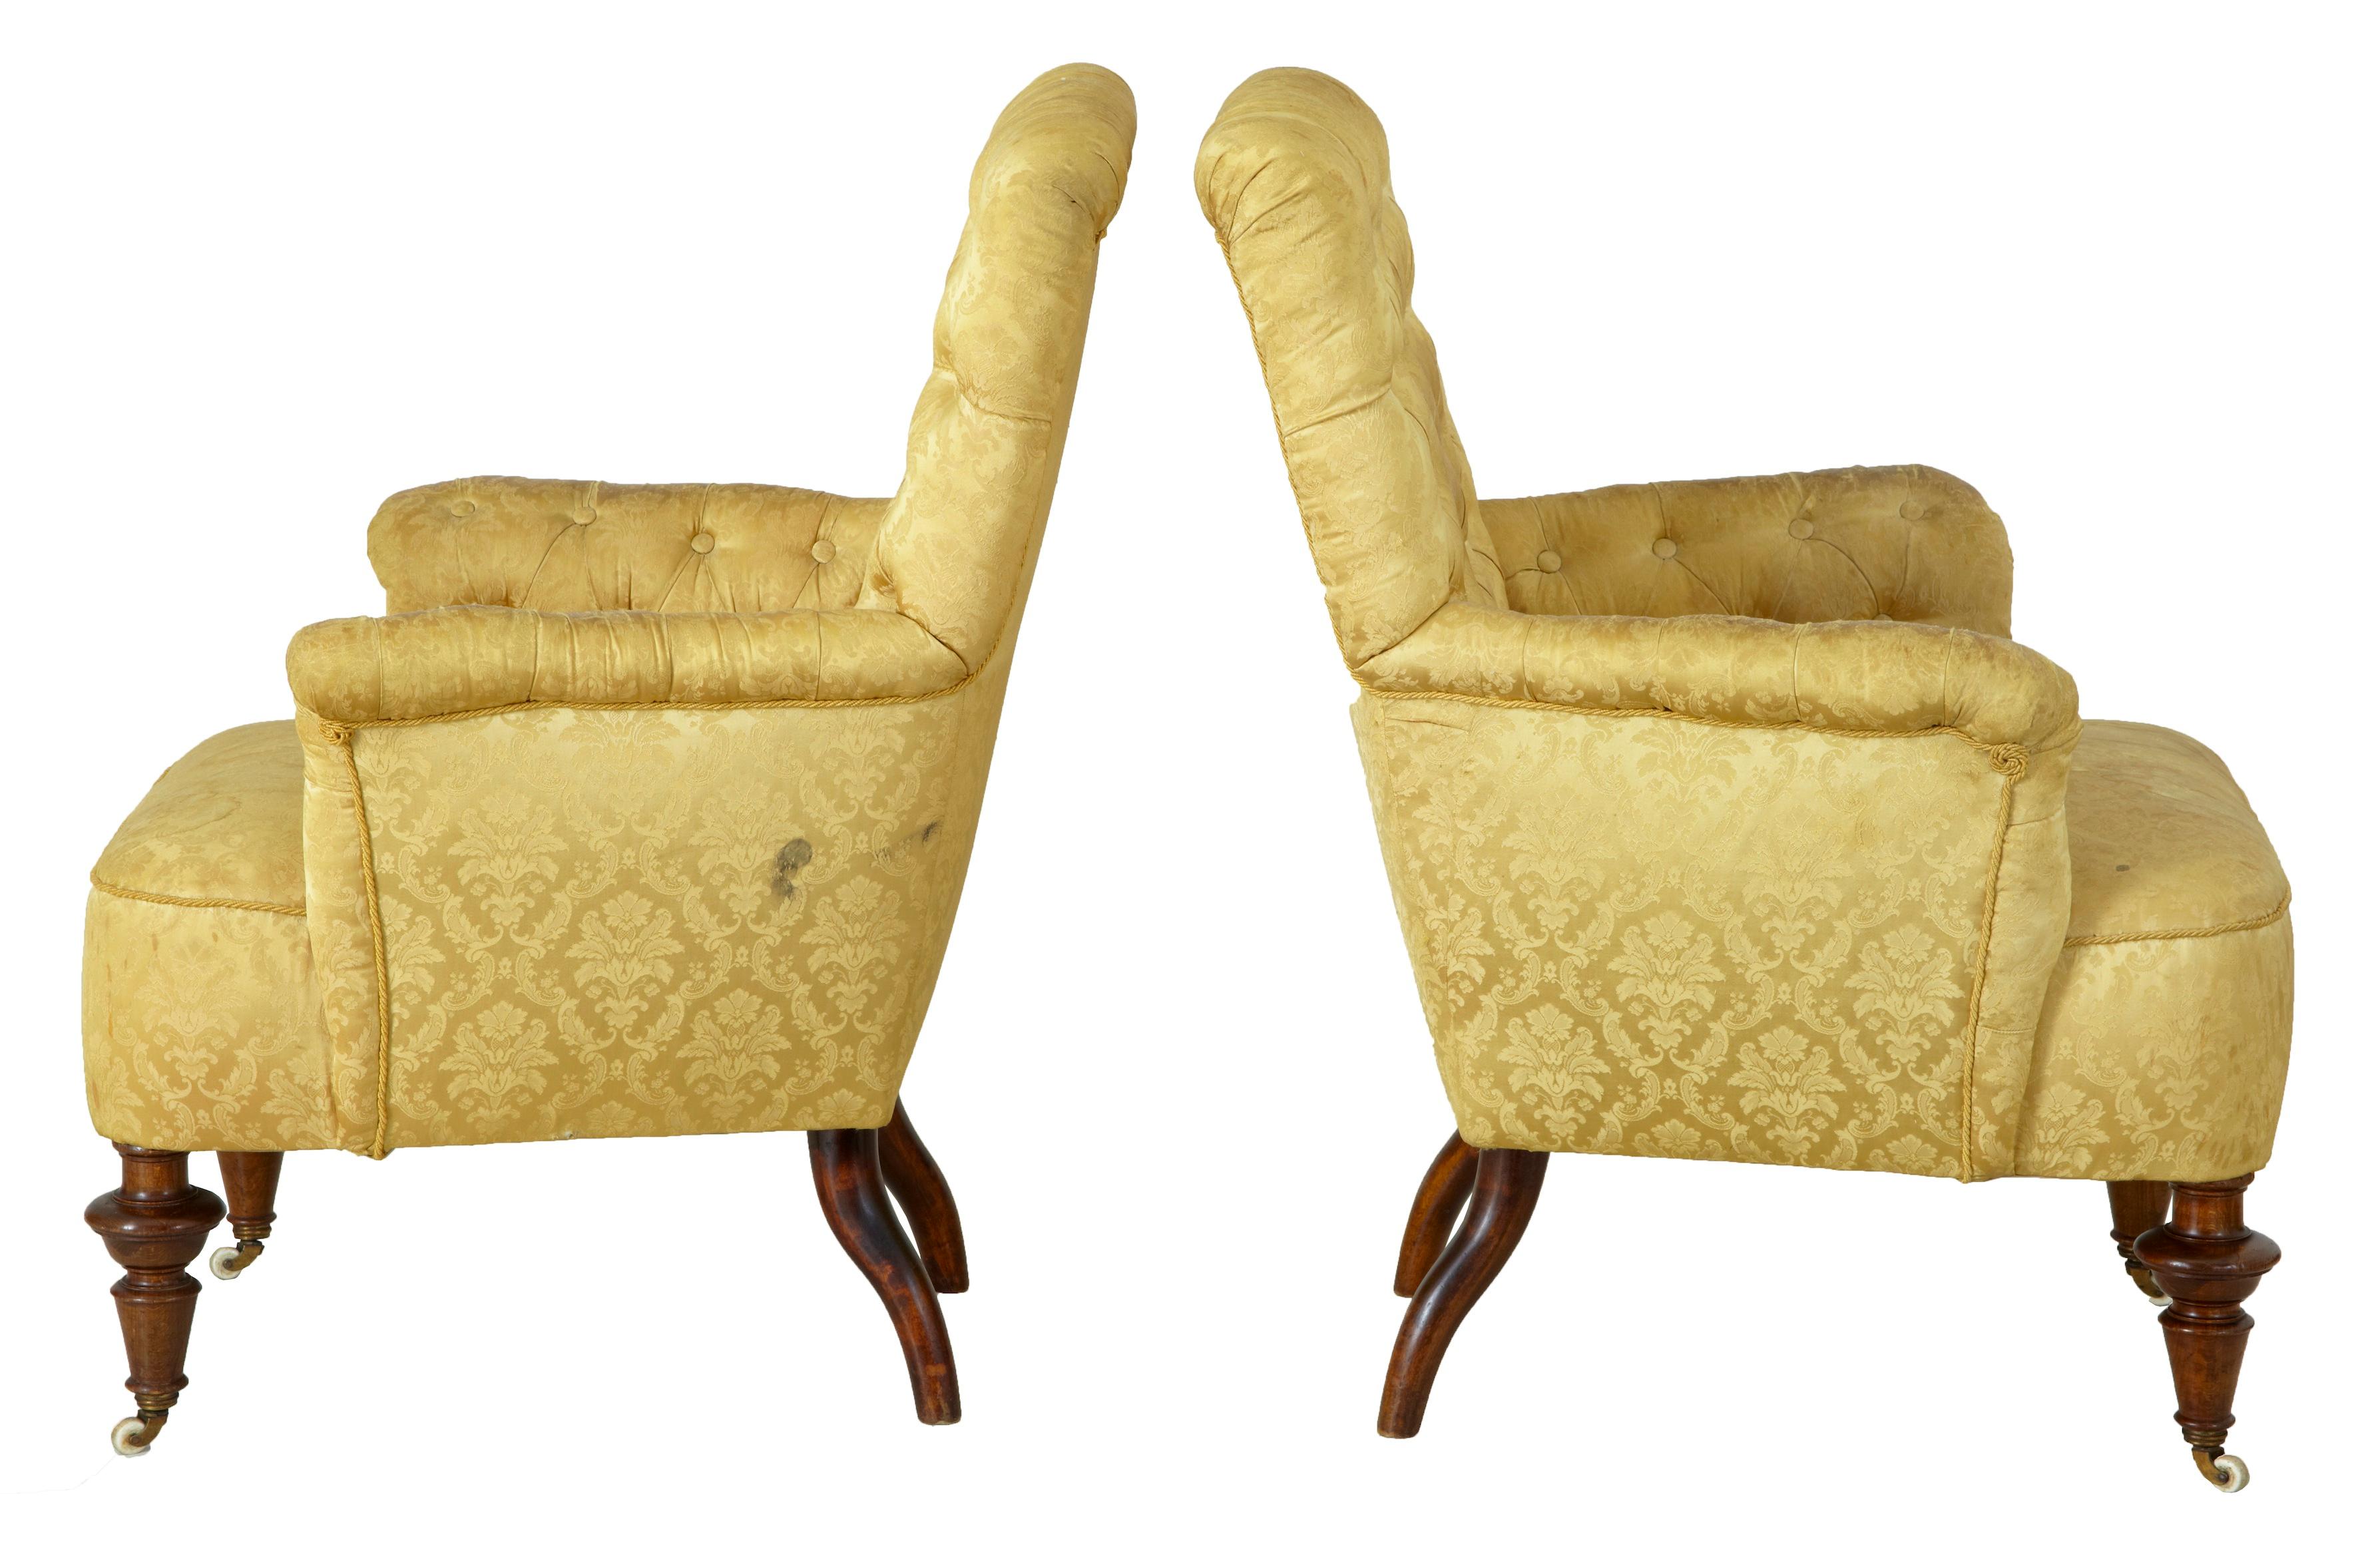 Fine pair of Victorian armchairs, circa 1890.
Featuring button back arms and backs.
Standing on walnut legs, front legs are turned and mounted with castors.
Staining and marks to fabric.

Measures: Height 37 1/2